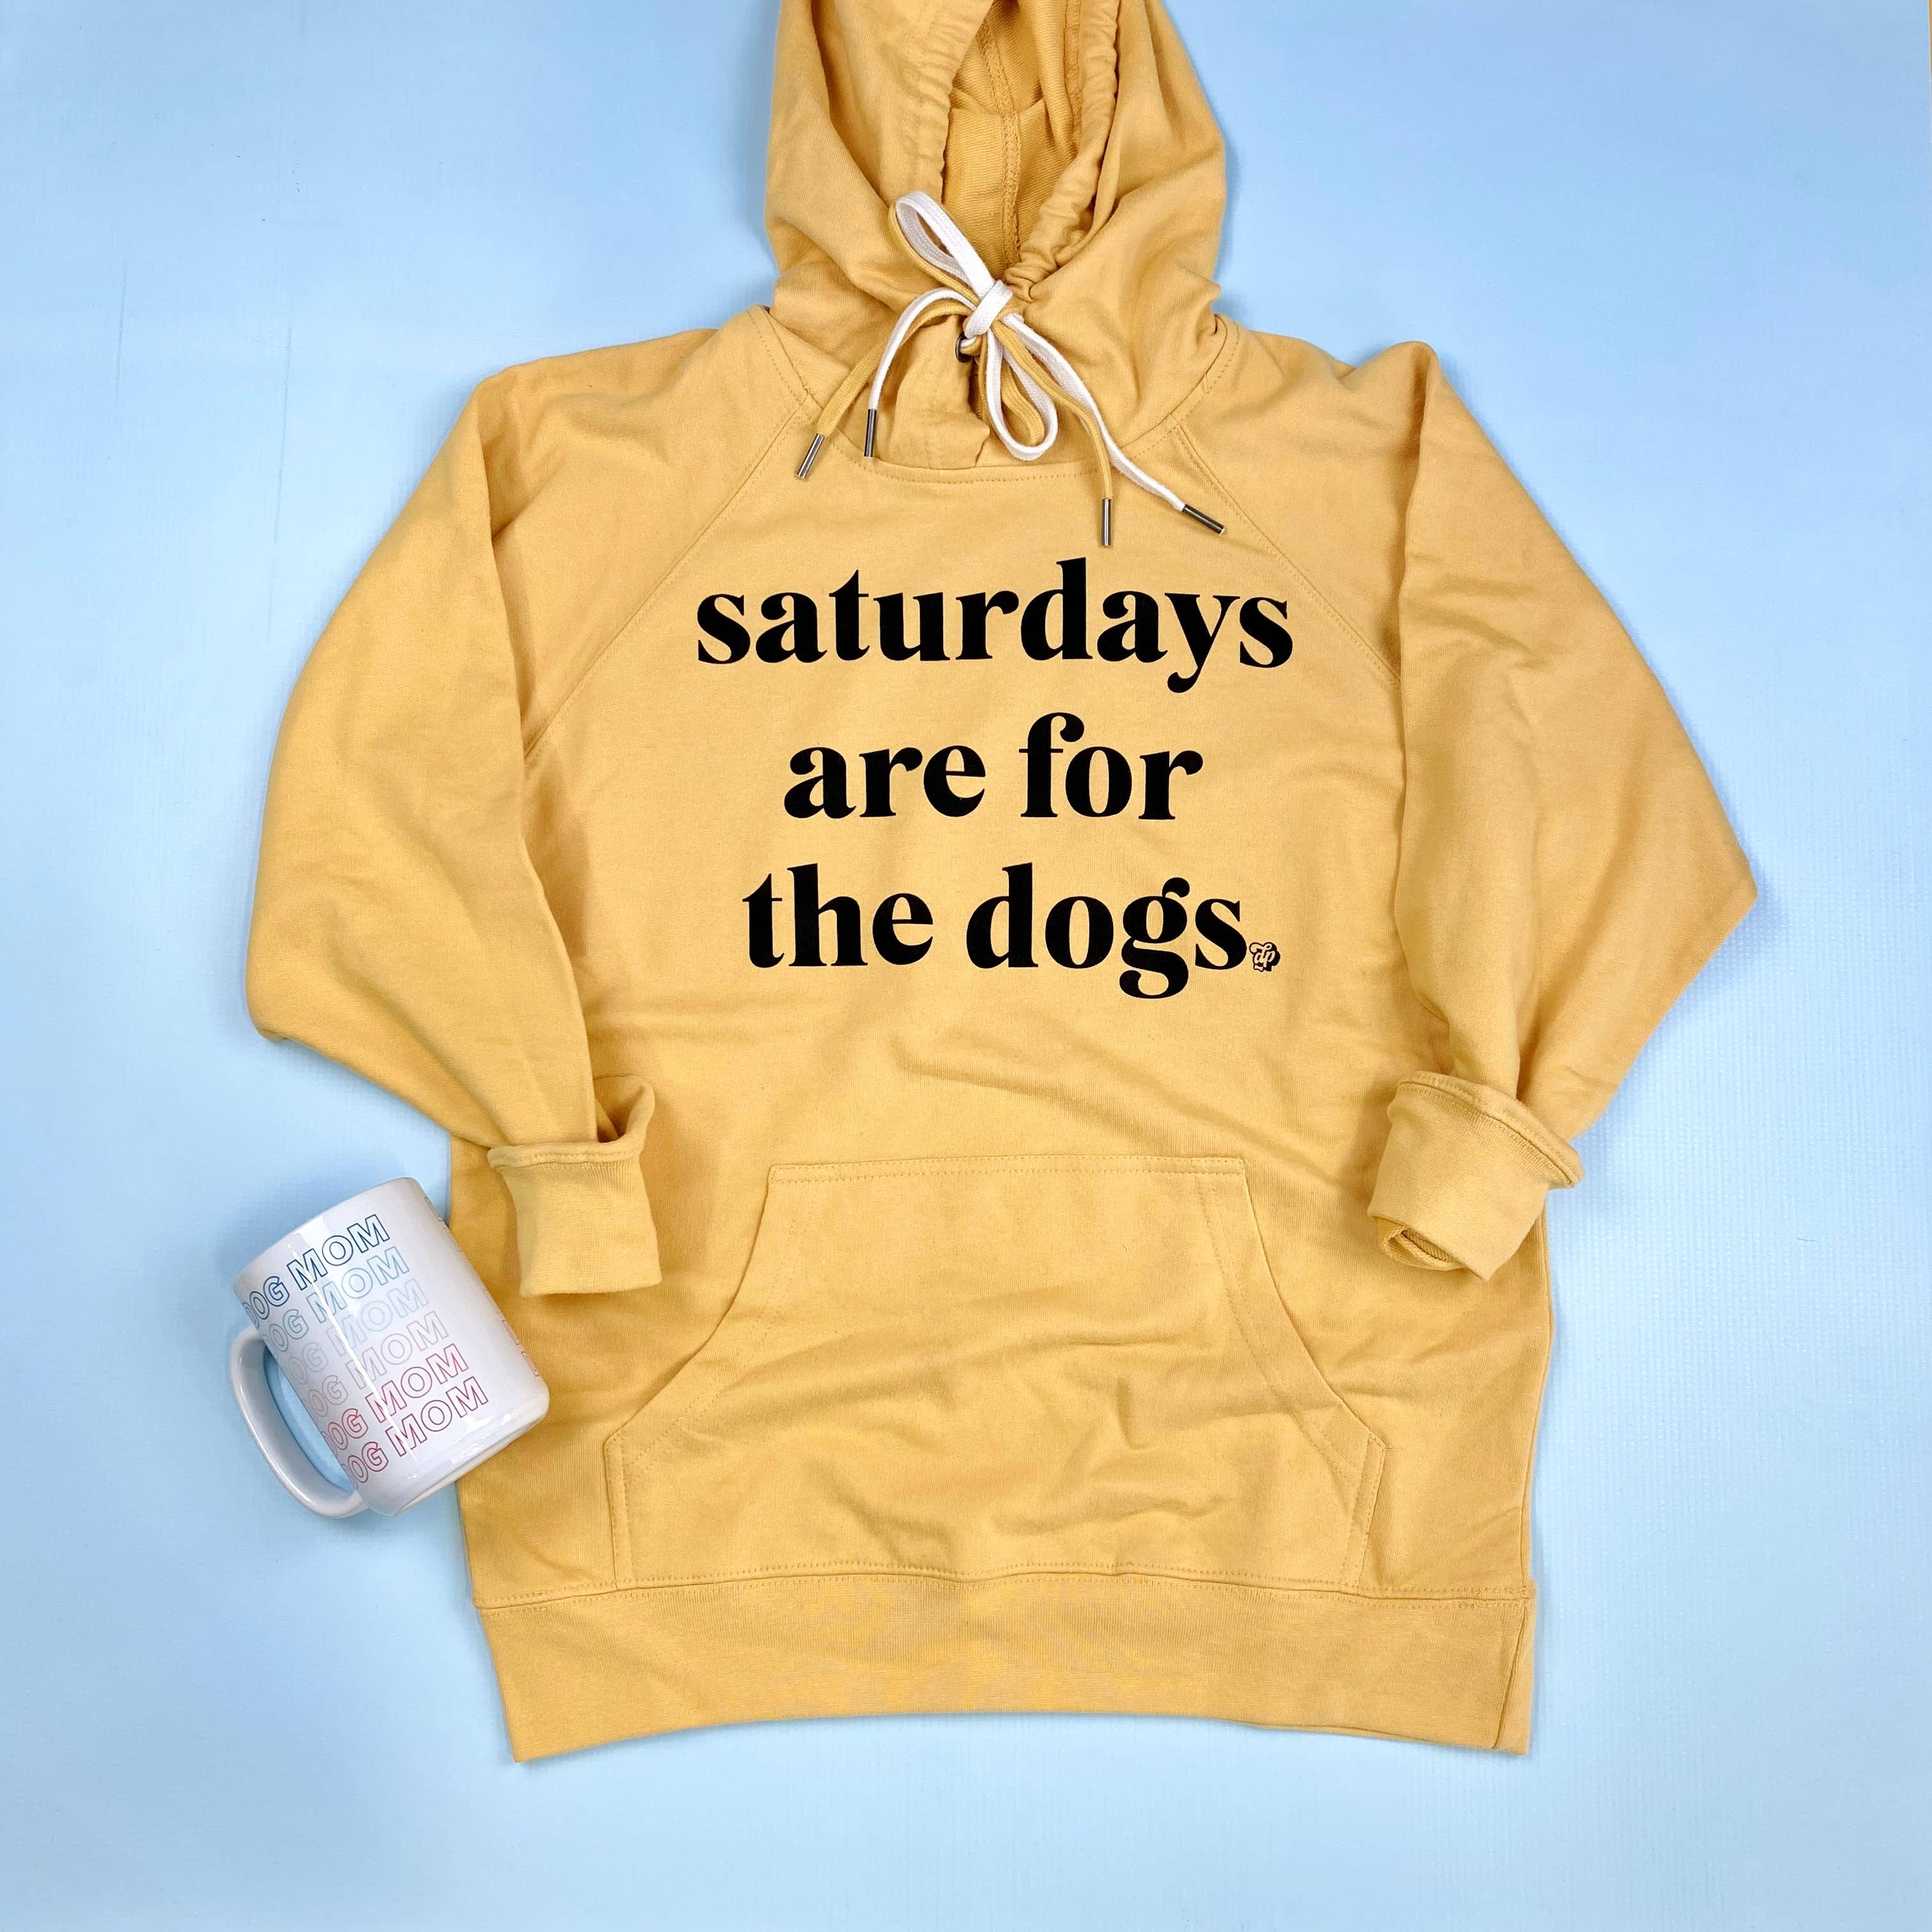 Saturdays are for the dogs hoodie